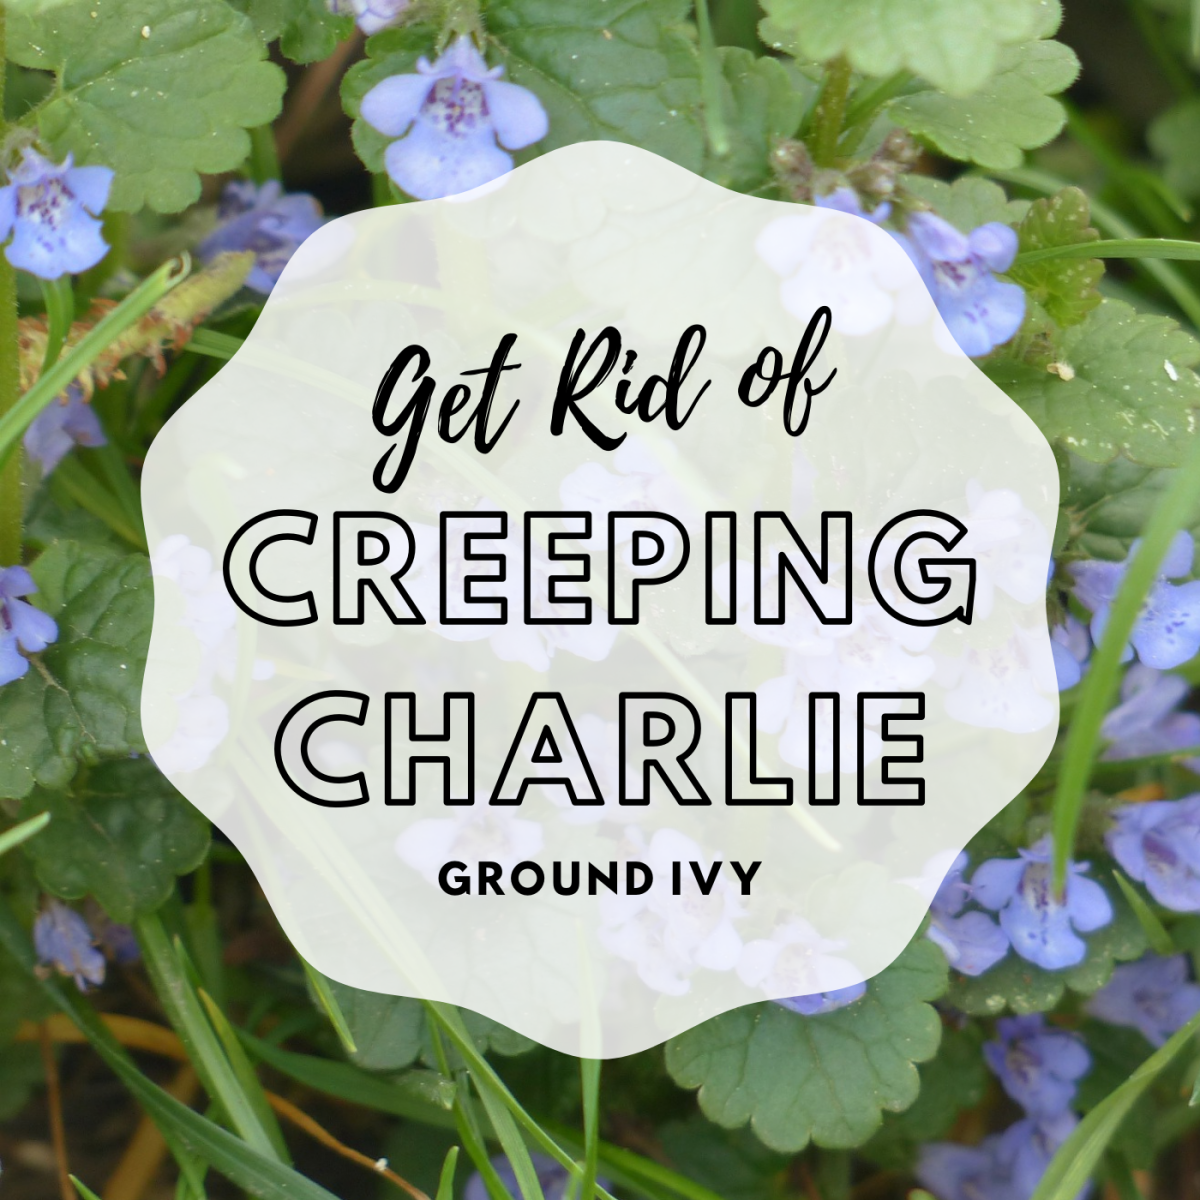 How to Get Rid of Creeping Charlie Ground Ivy